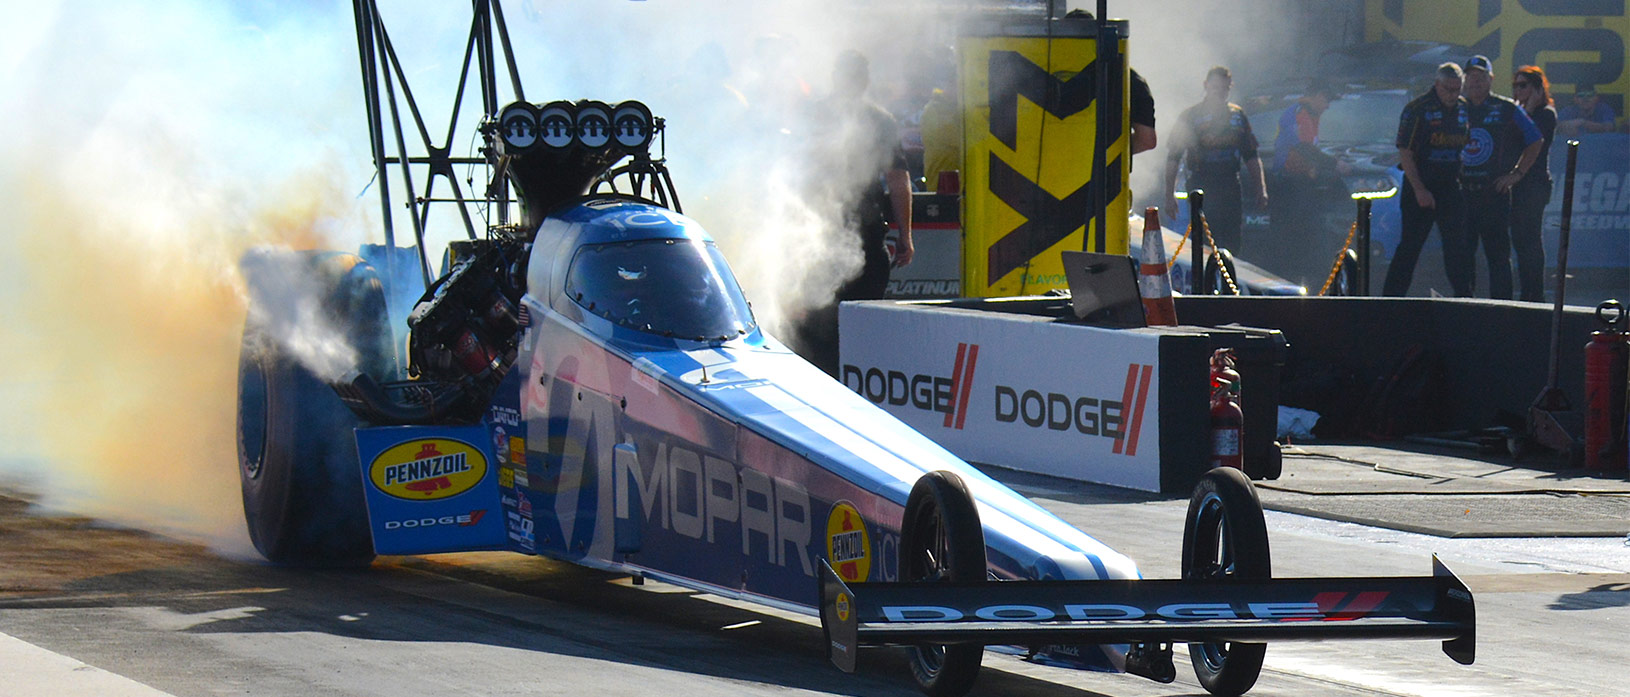 top fuel dragster doing a burnout